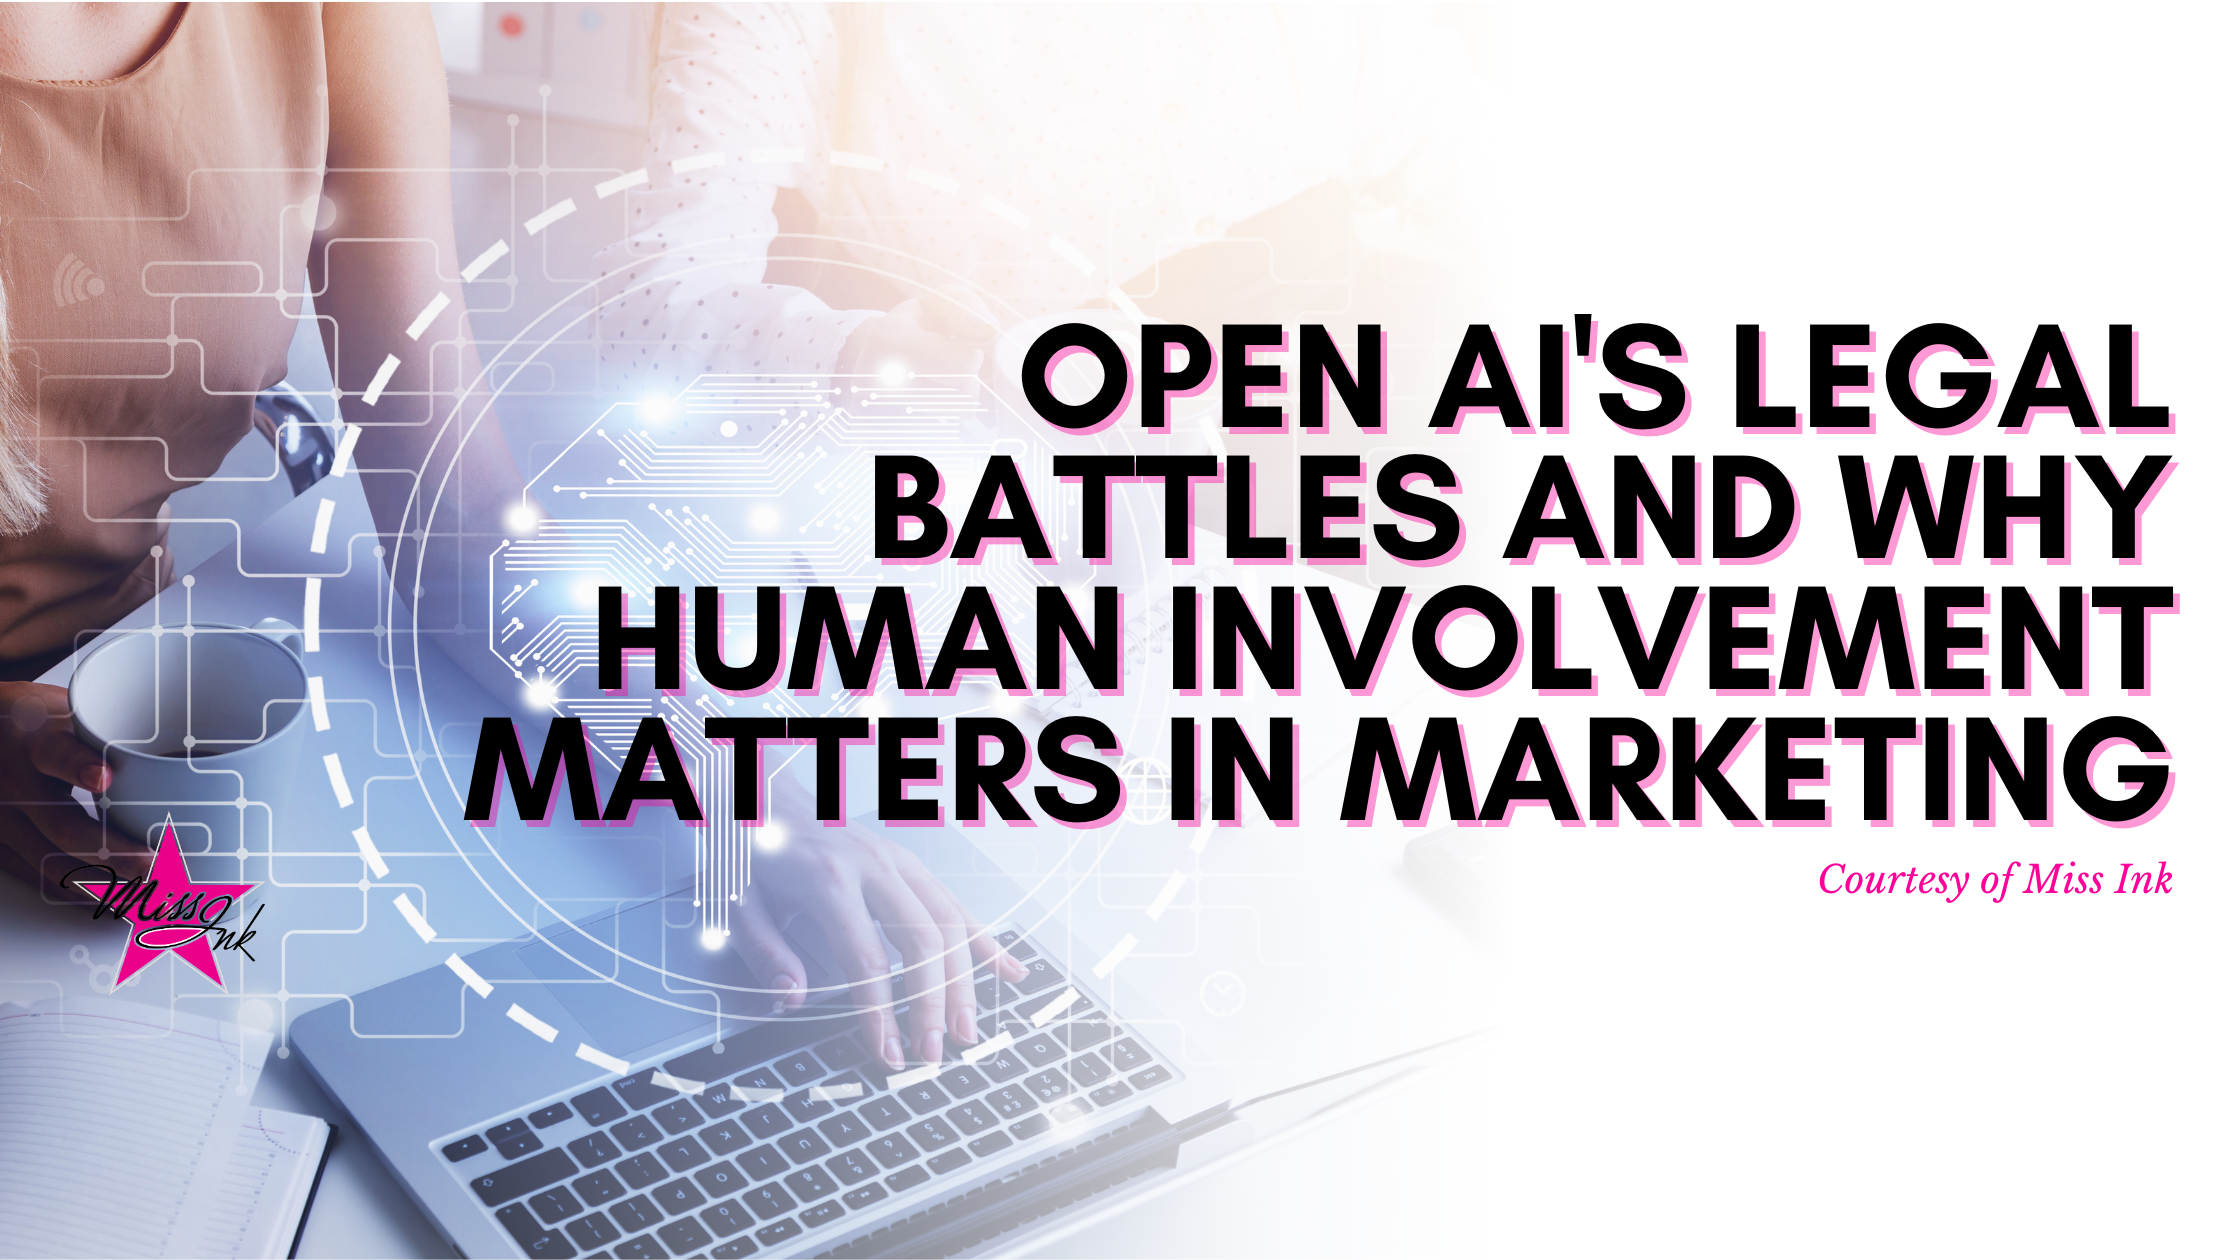 Open AI’s Legal Battles and Why Human Involvement Matters in Marketing